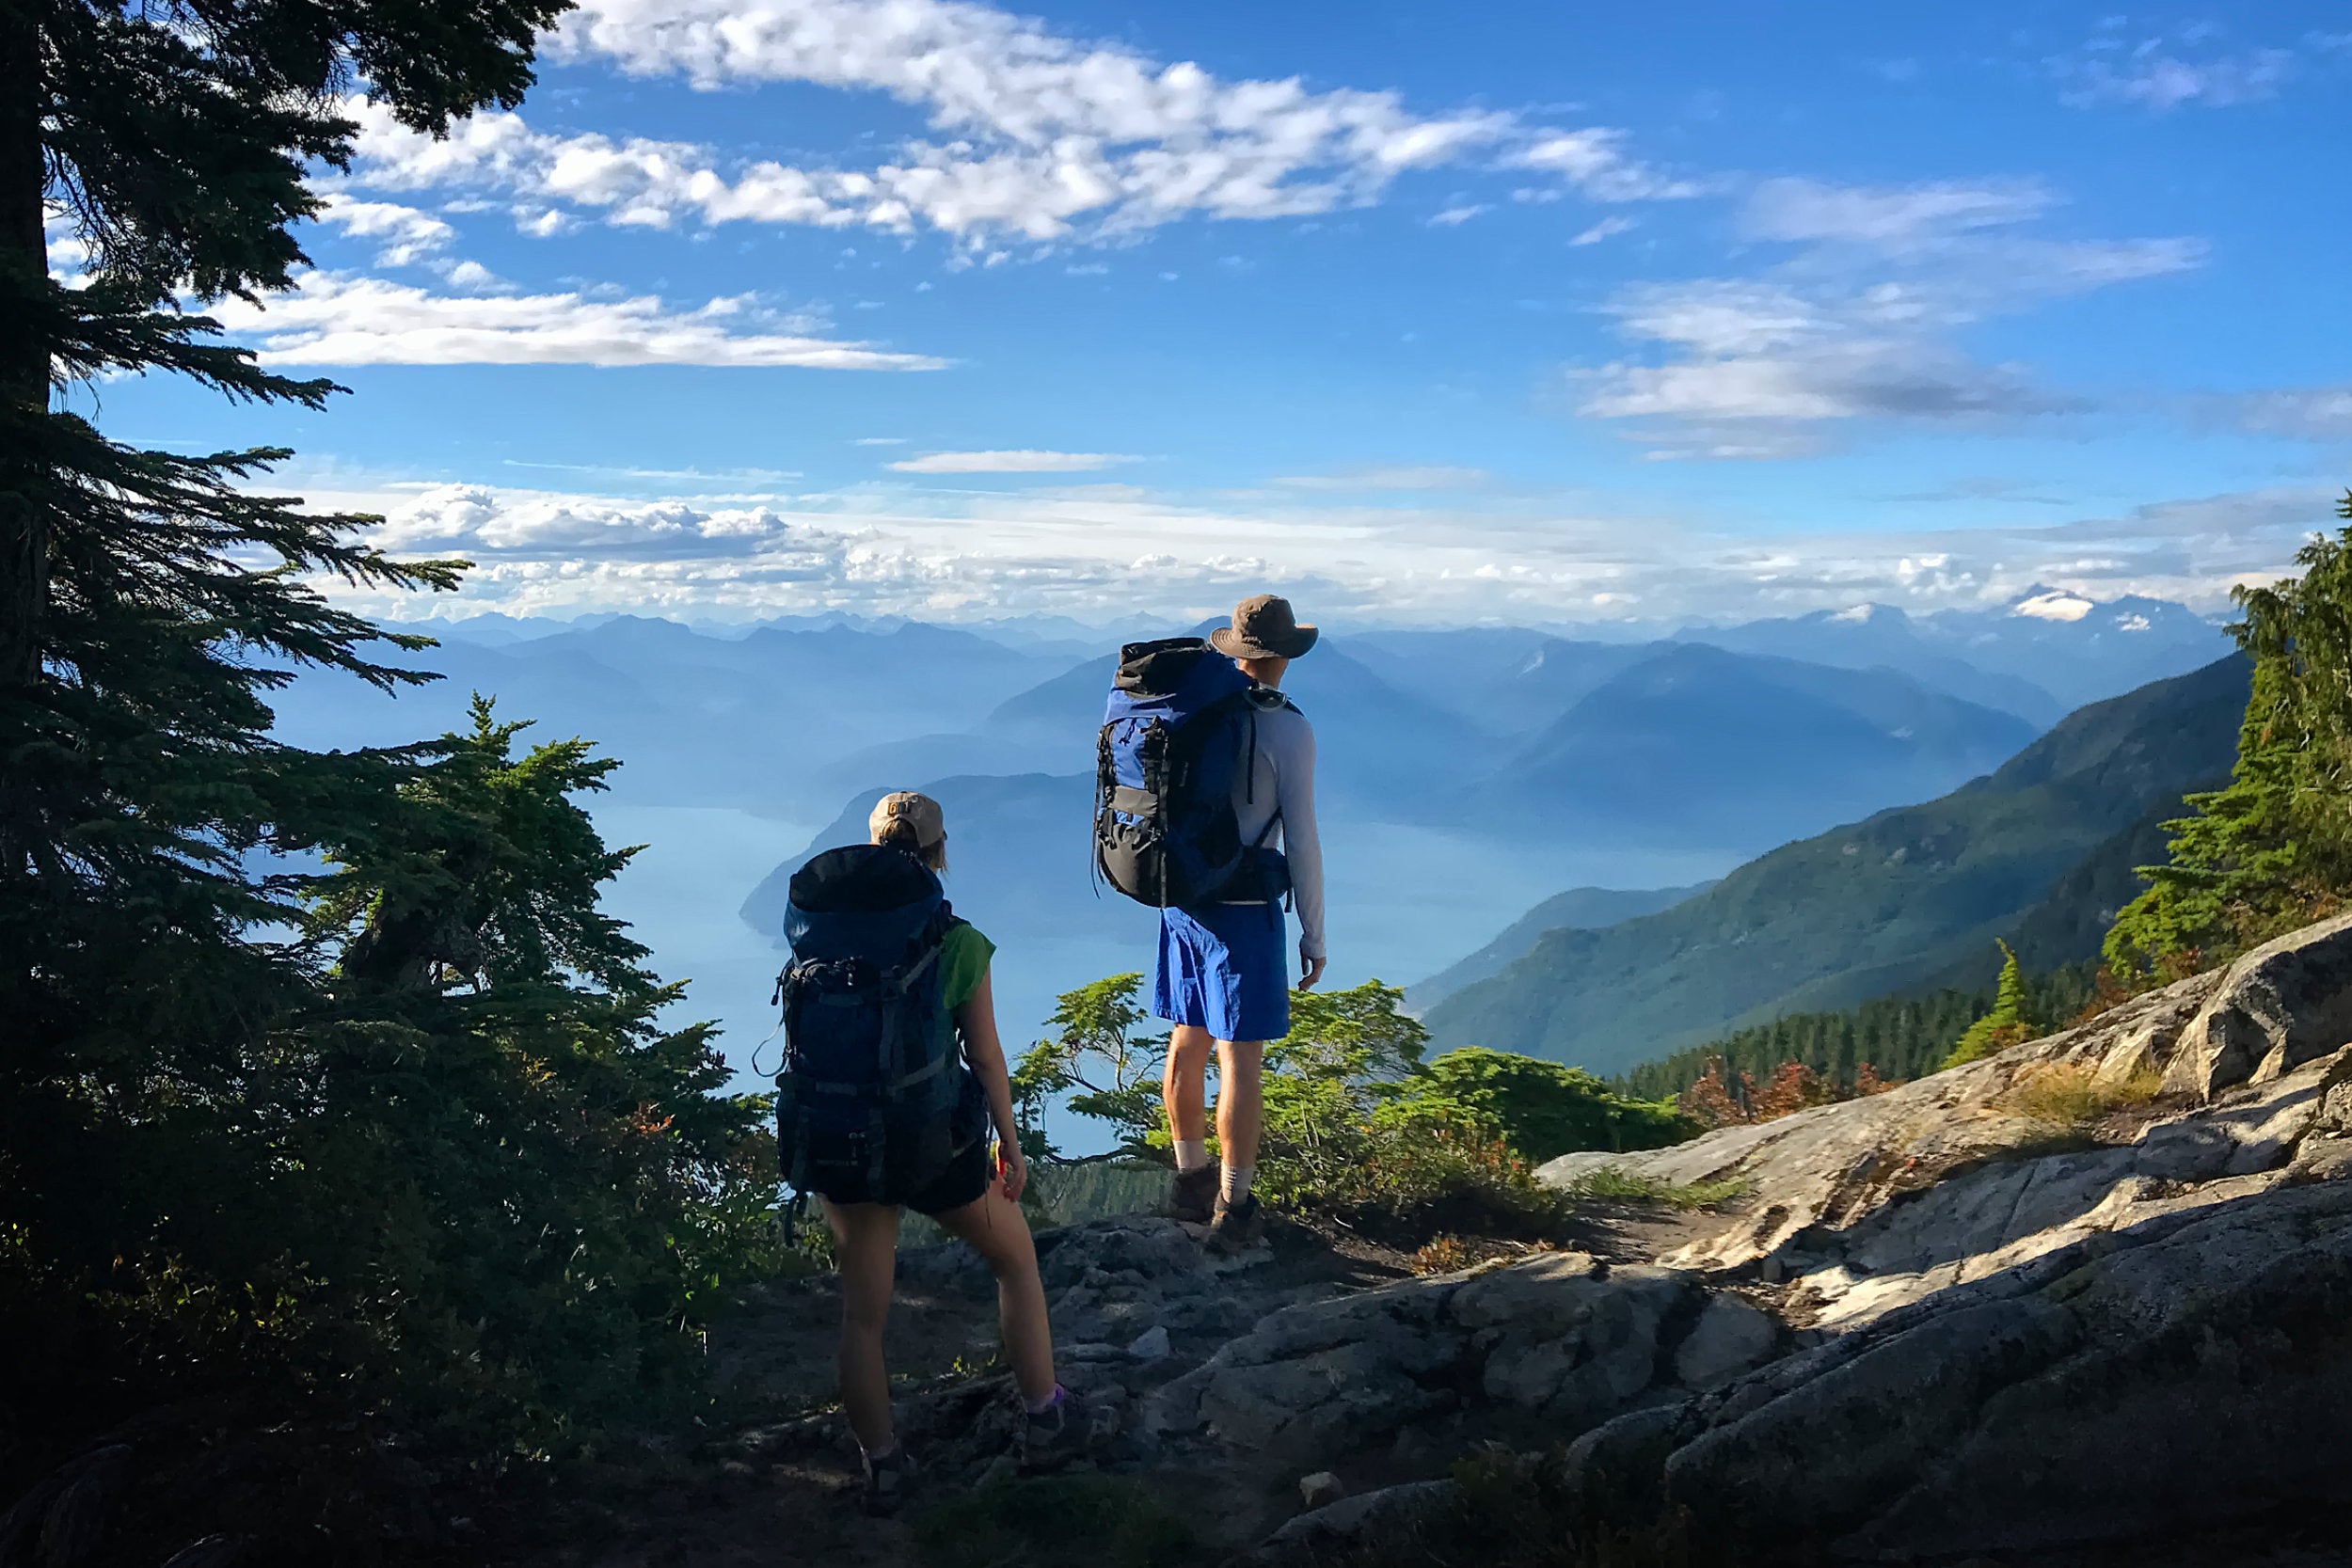 Hiking in Vancouver, British Columbia - Bearwatch Systems Company Founders